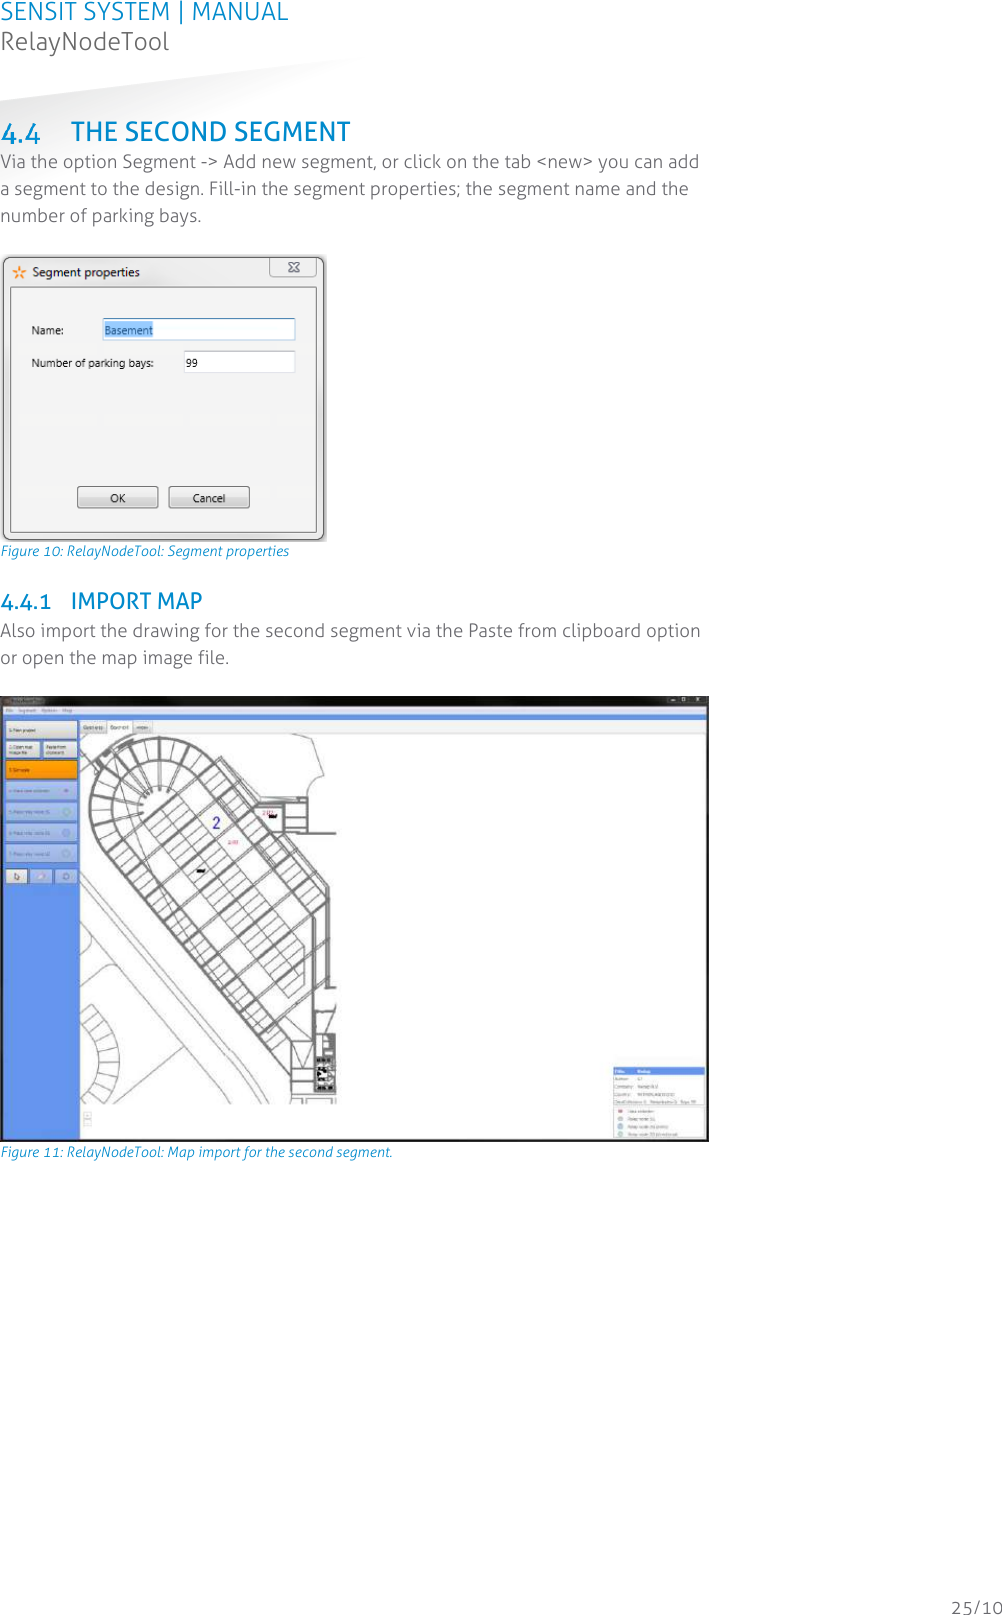 SENSIT SYSTEM | MANUAL RelayNodeTool  25/1063  THE SECOND SEGMENT Via the option Segment -&gt; Add new segment, or click on the tab &lt;new&gt; you can add a segment to the design. Fill-in the segment properties; the segment name and the number of parking bays.   Figure 10: RelayNodeTool: Segment properties 4.4.1 IMPORT MAP Also import the drawing for the second segment via the Paste from clipboard option or open the map image file.   Figure 11: RelayNodeTool: Map import for the second segment.    